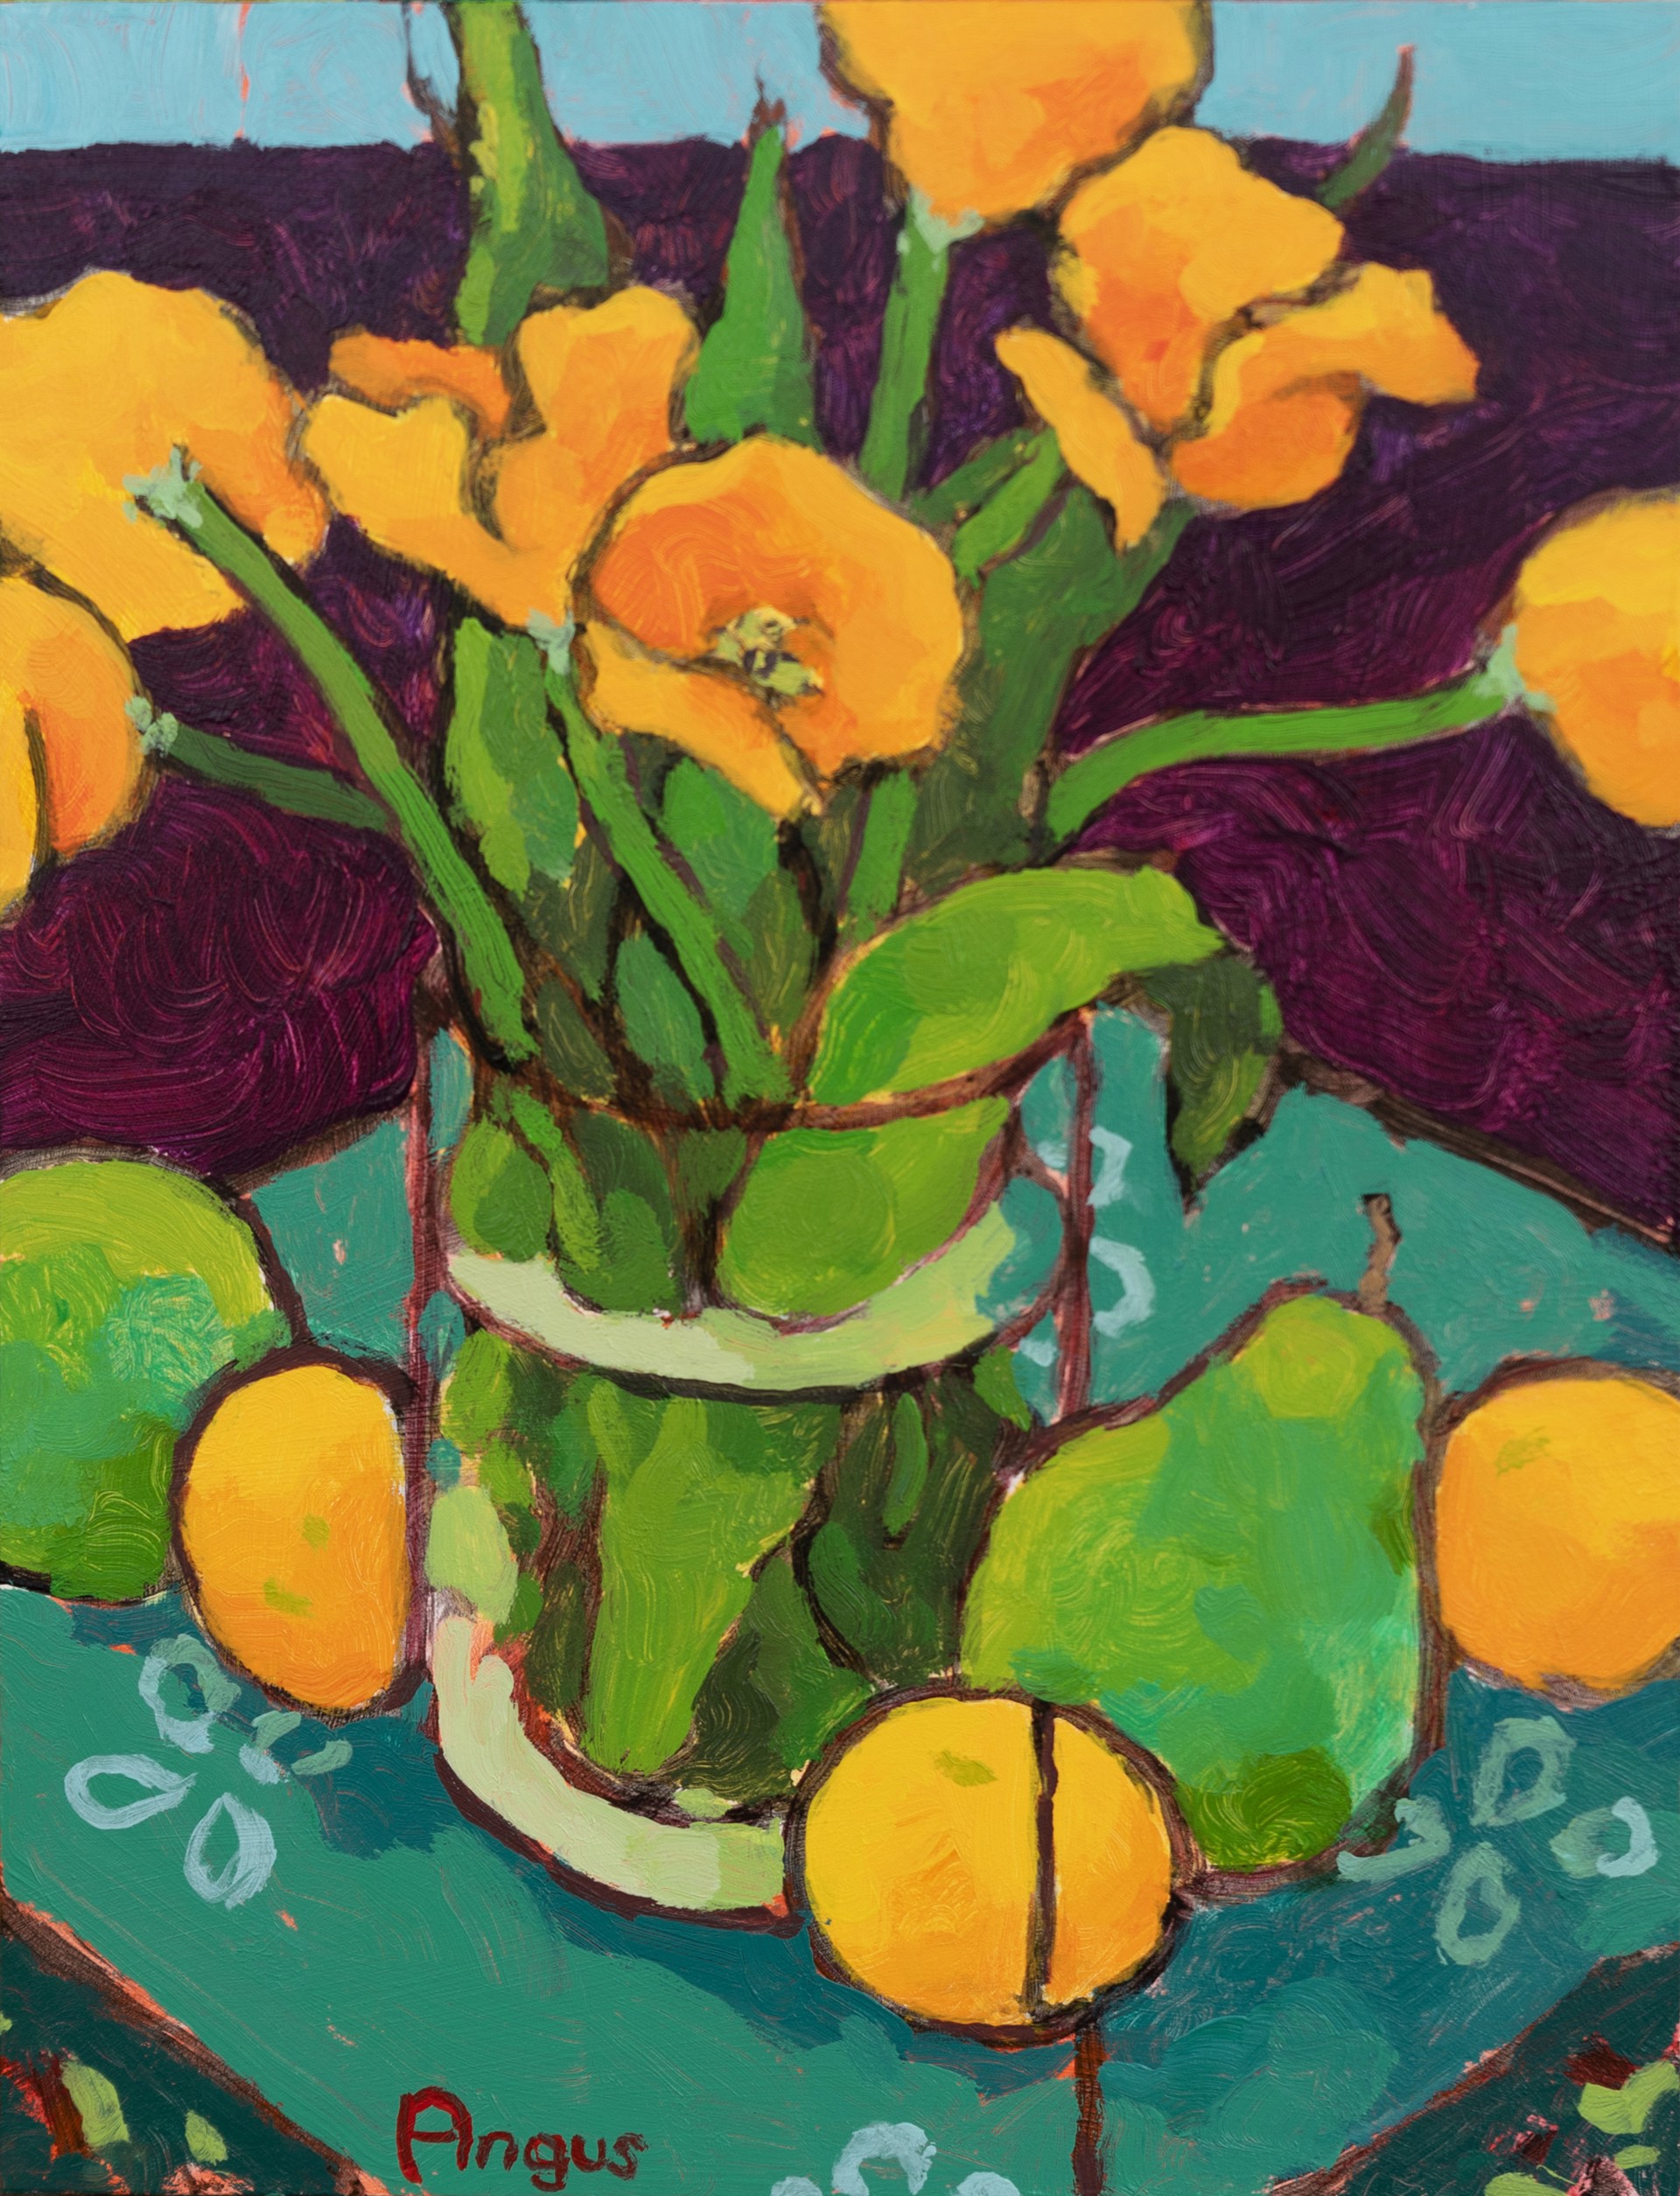 Small study of Tulips with Pears by Angus